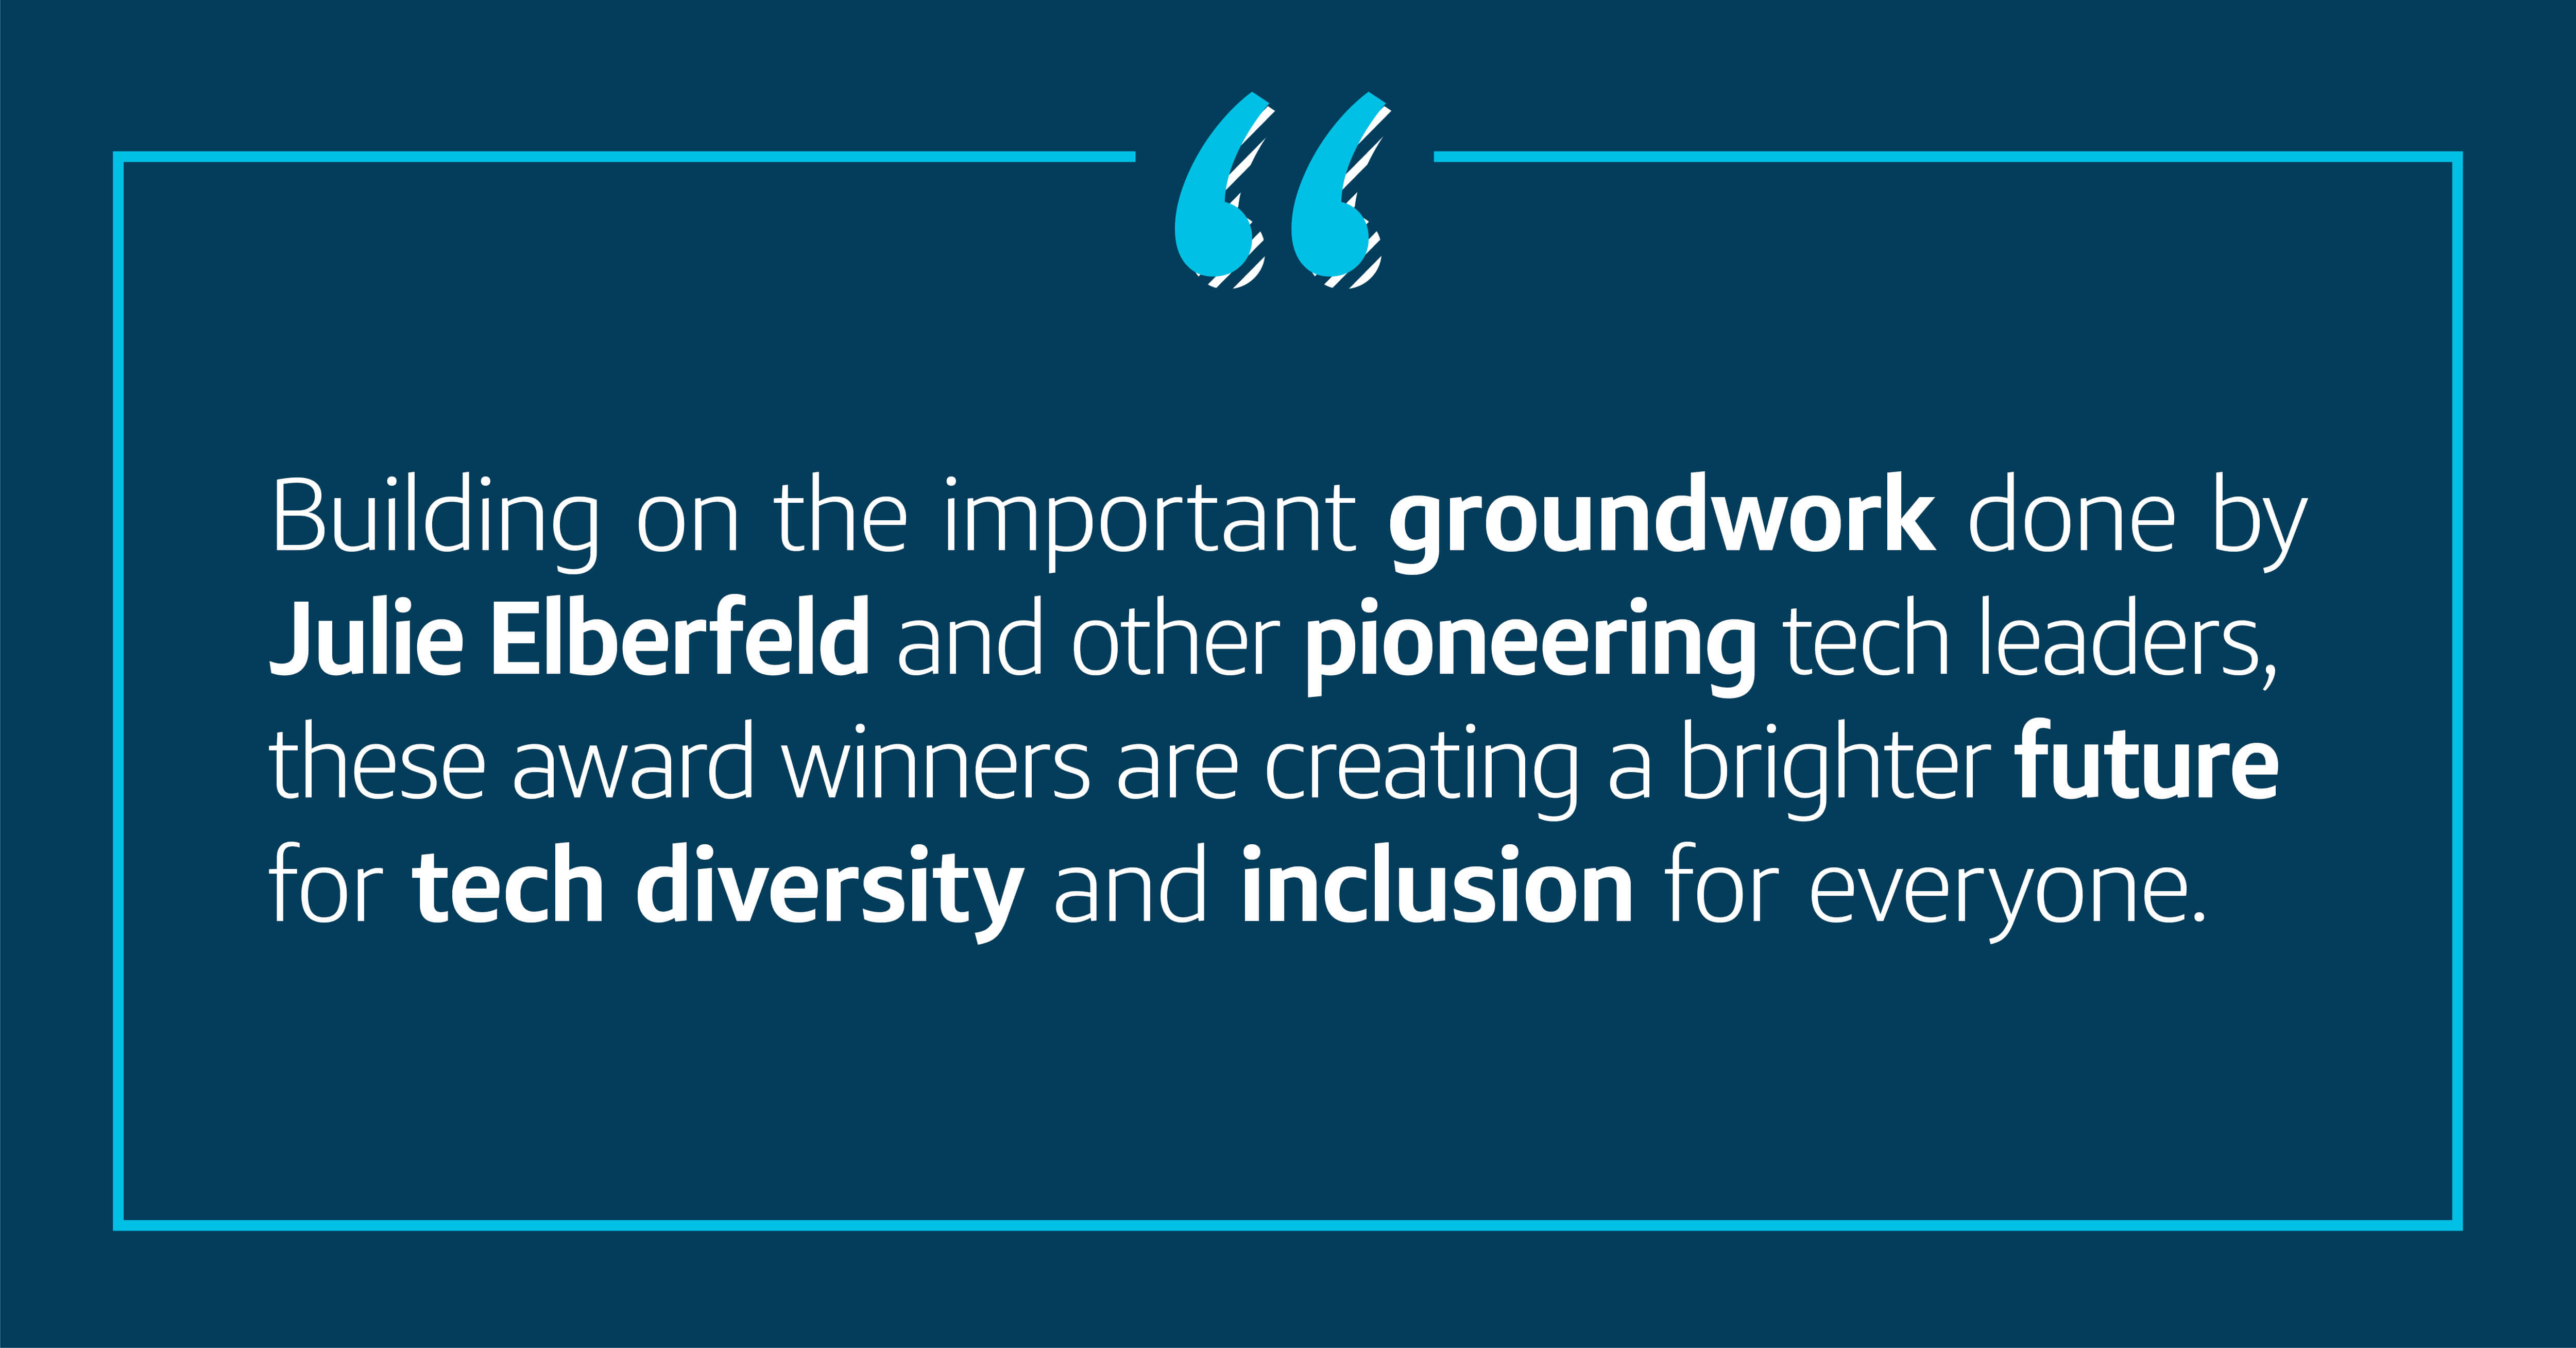 Building on the important groundwork done by Julie Elberfeld and other pioneering tech leaders, these award winners are creating a brighter future for tech diversity and inclusion for everyone